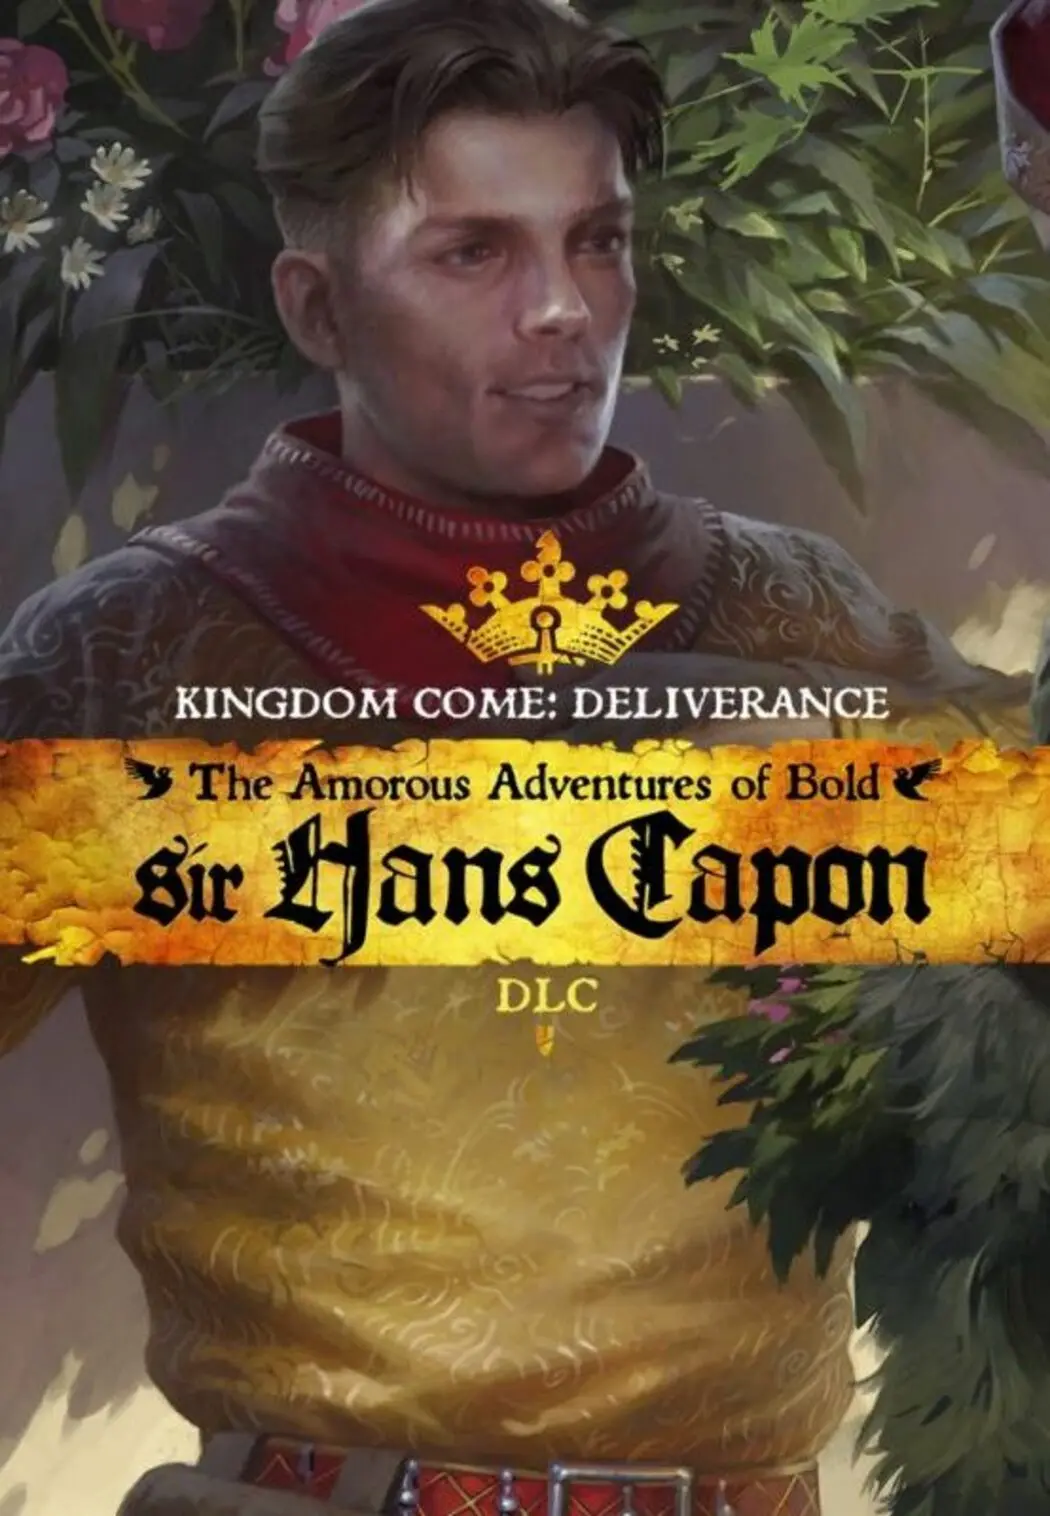 Kingdom Come: Deliverance - The Amorous Adventures of Bold Sir Hans Capon DLC (PC) - Steam - Digital Code